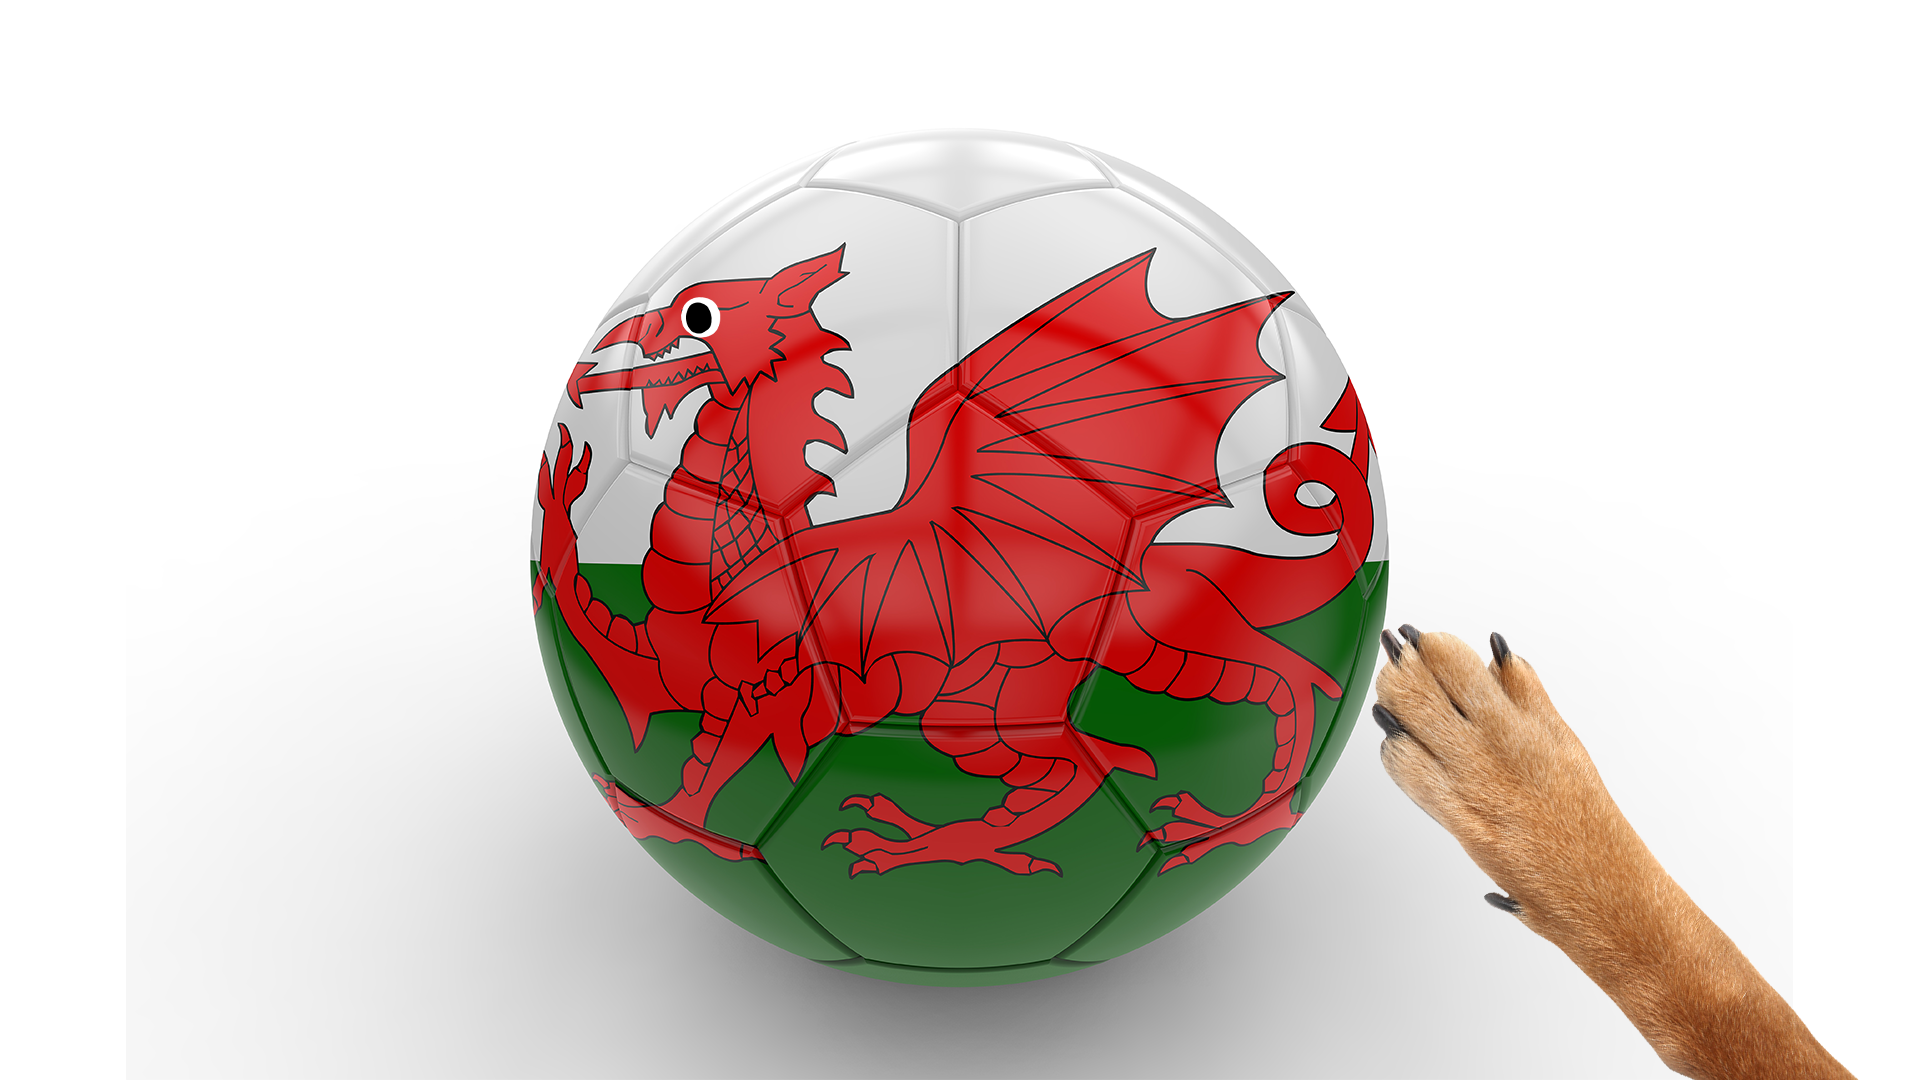 Football with Welsh flag and dog paw on white background